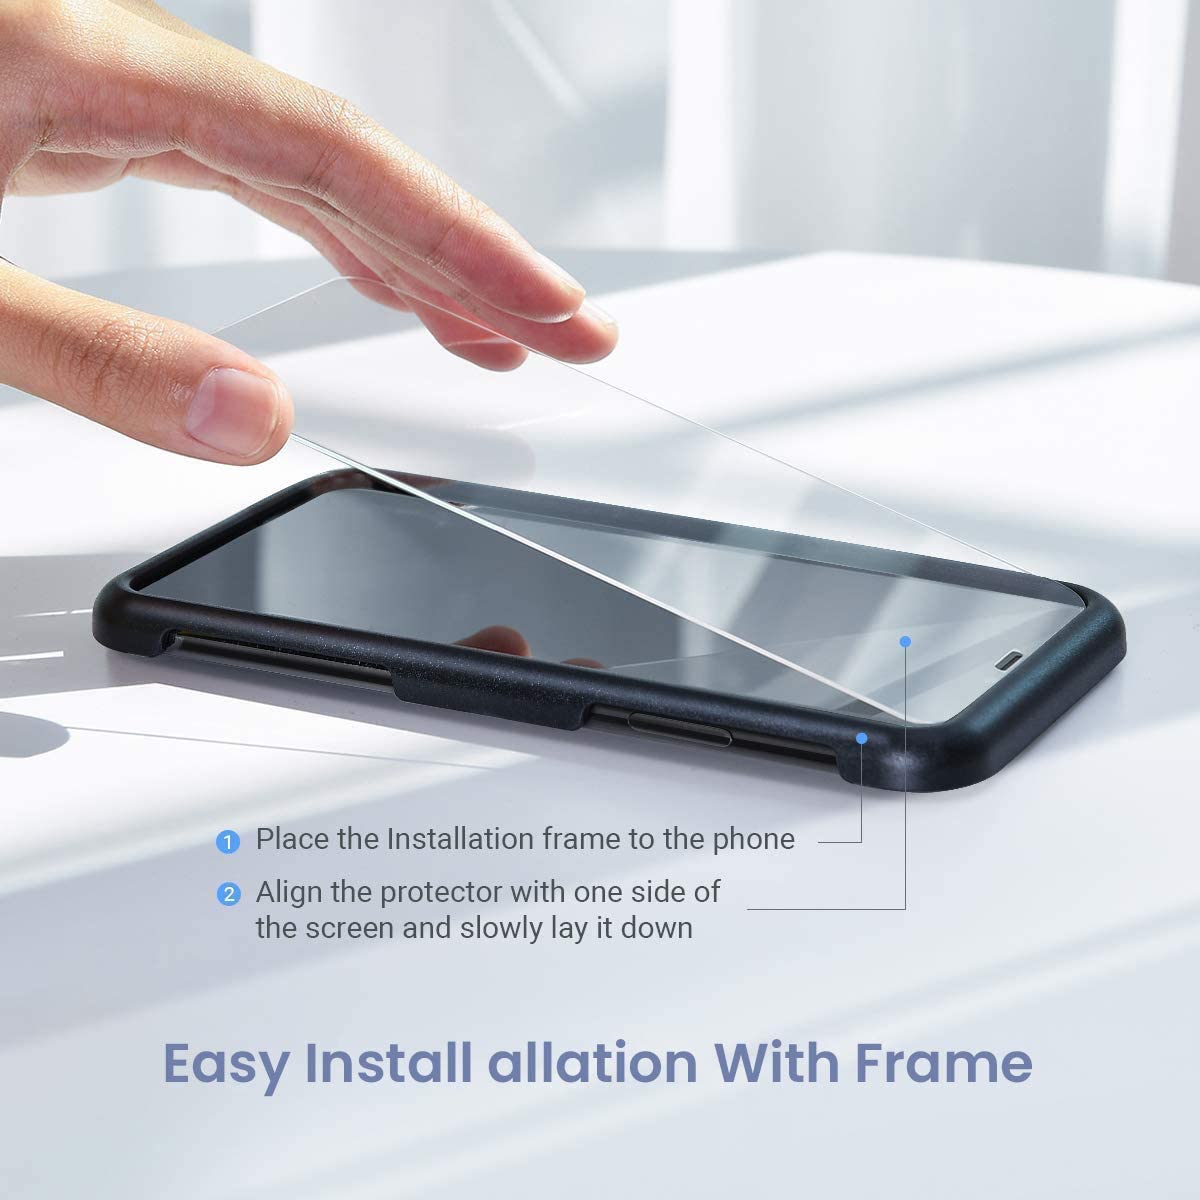 Josie HD Transparent Screen Protector OPPO A1 A52 A7 2018 A7X AX5 AX5s AX7 K3 K5 Neo 9 F1s F5 F7 F9 F11 F15 F17 Pro Tempered Glass